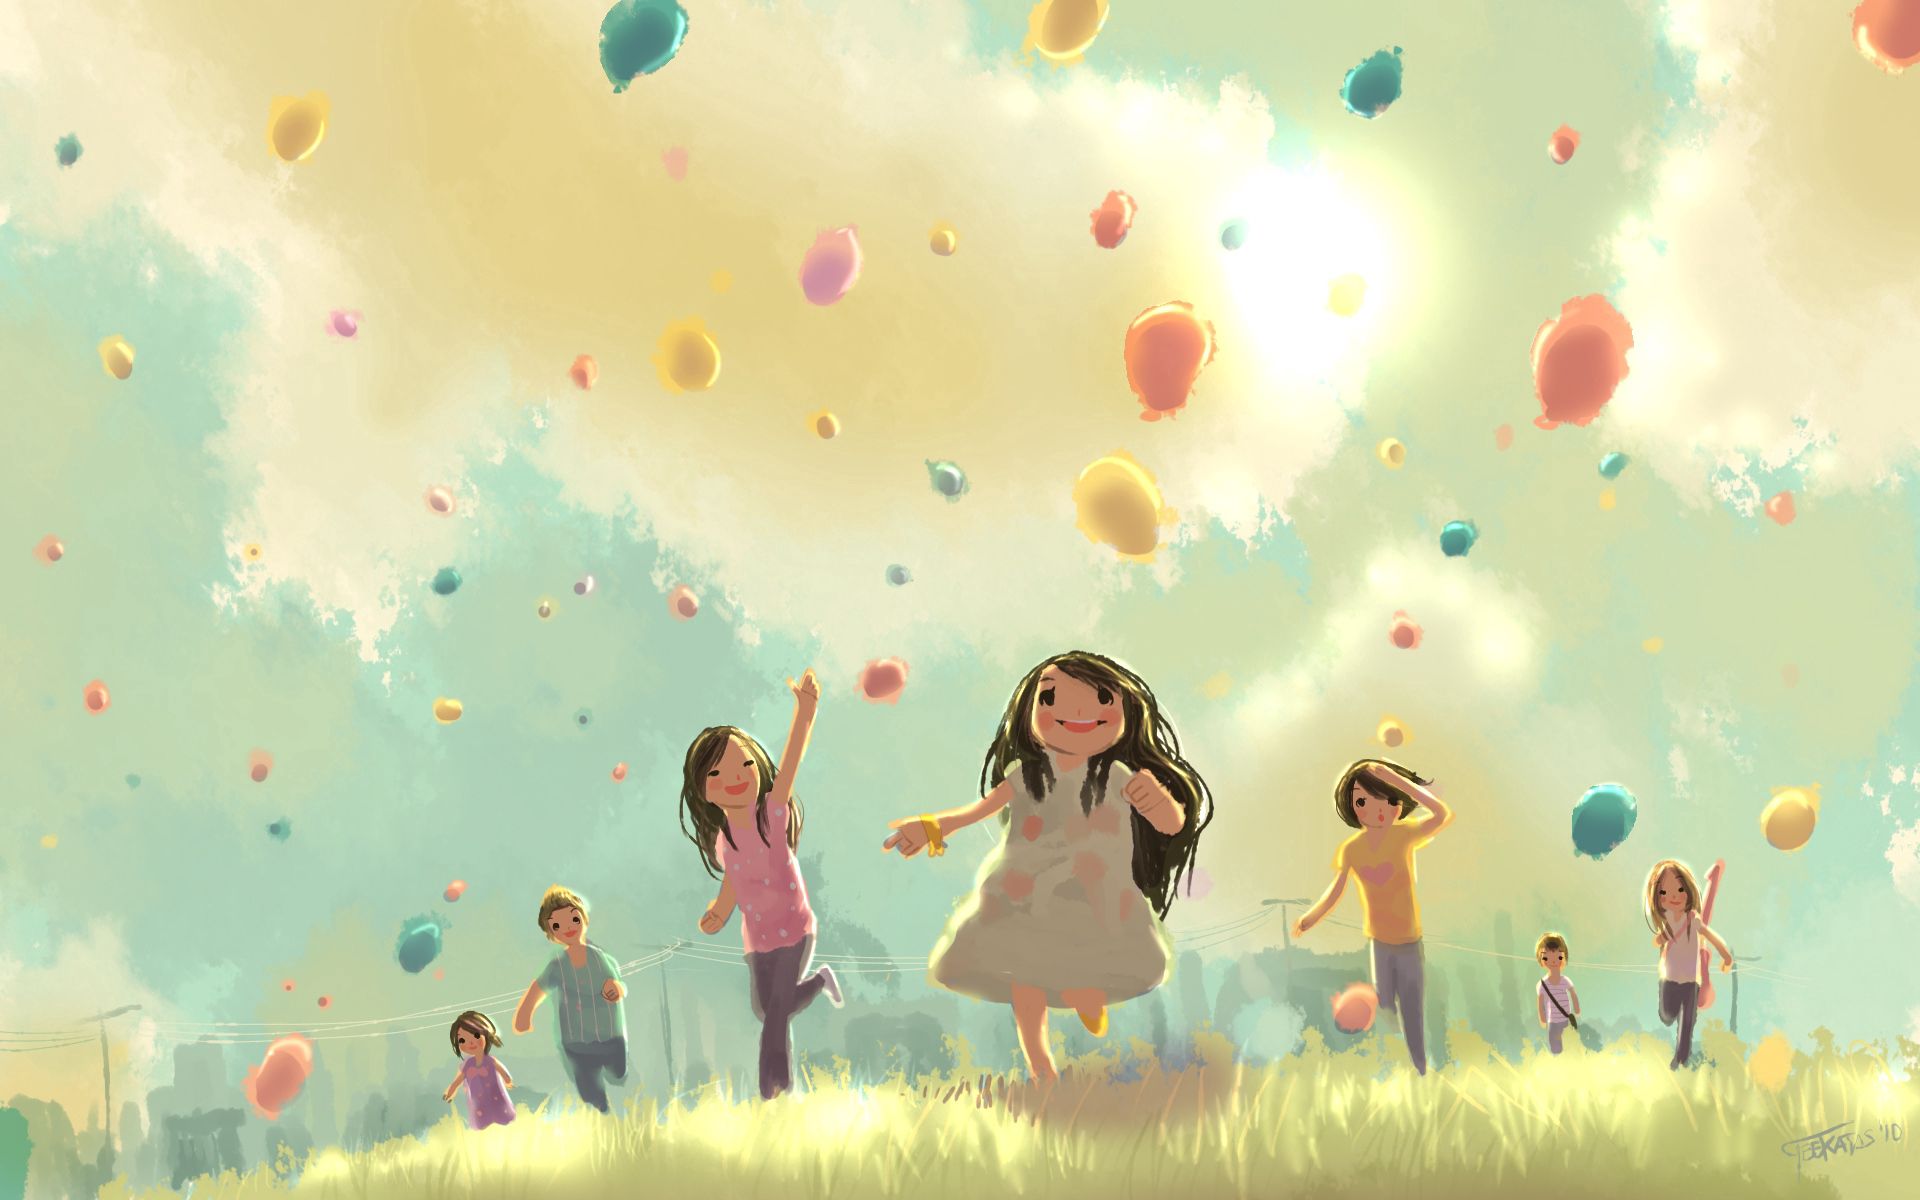 141994 download wallpaper grass, art, children, balloons, holiday, bounce, jump, run, running screensavers and pictures for free